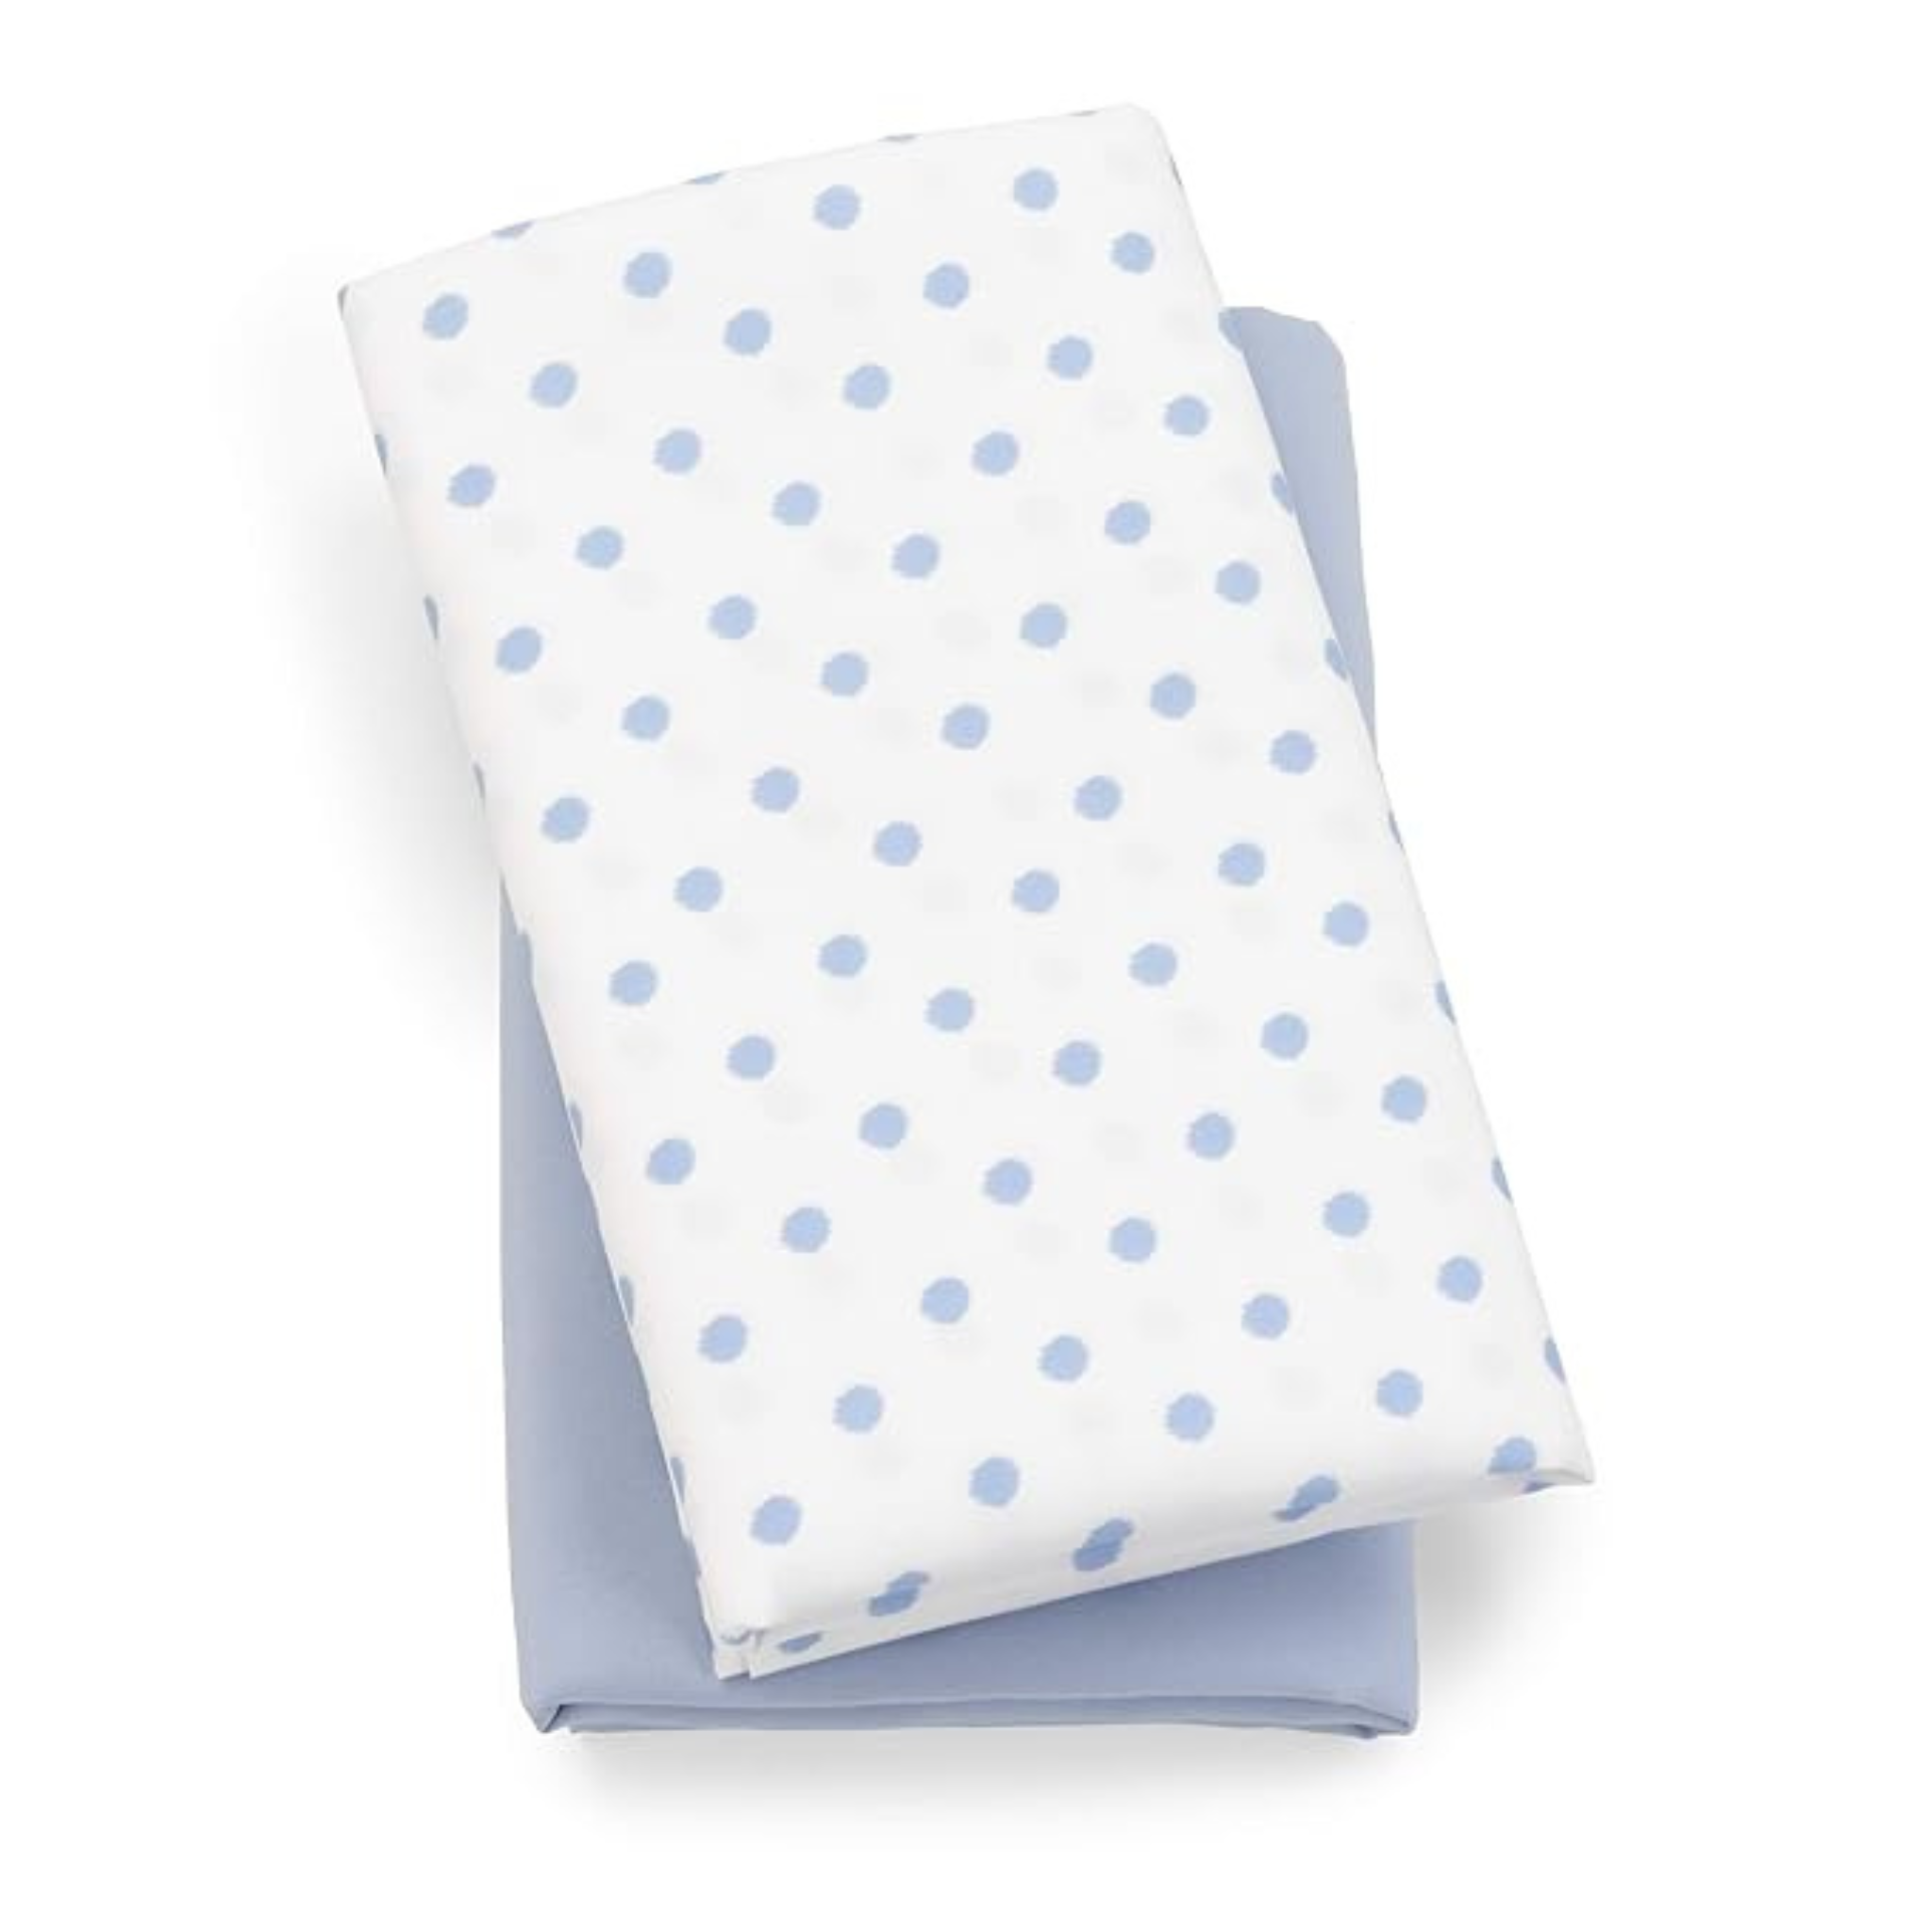 2 Pack Of Chicco Lullaby Blue Dot Playard Sheets